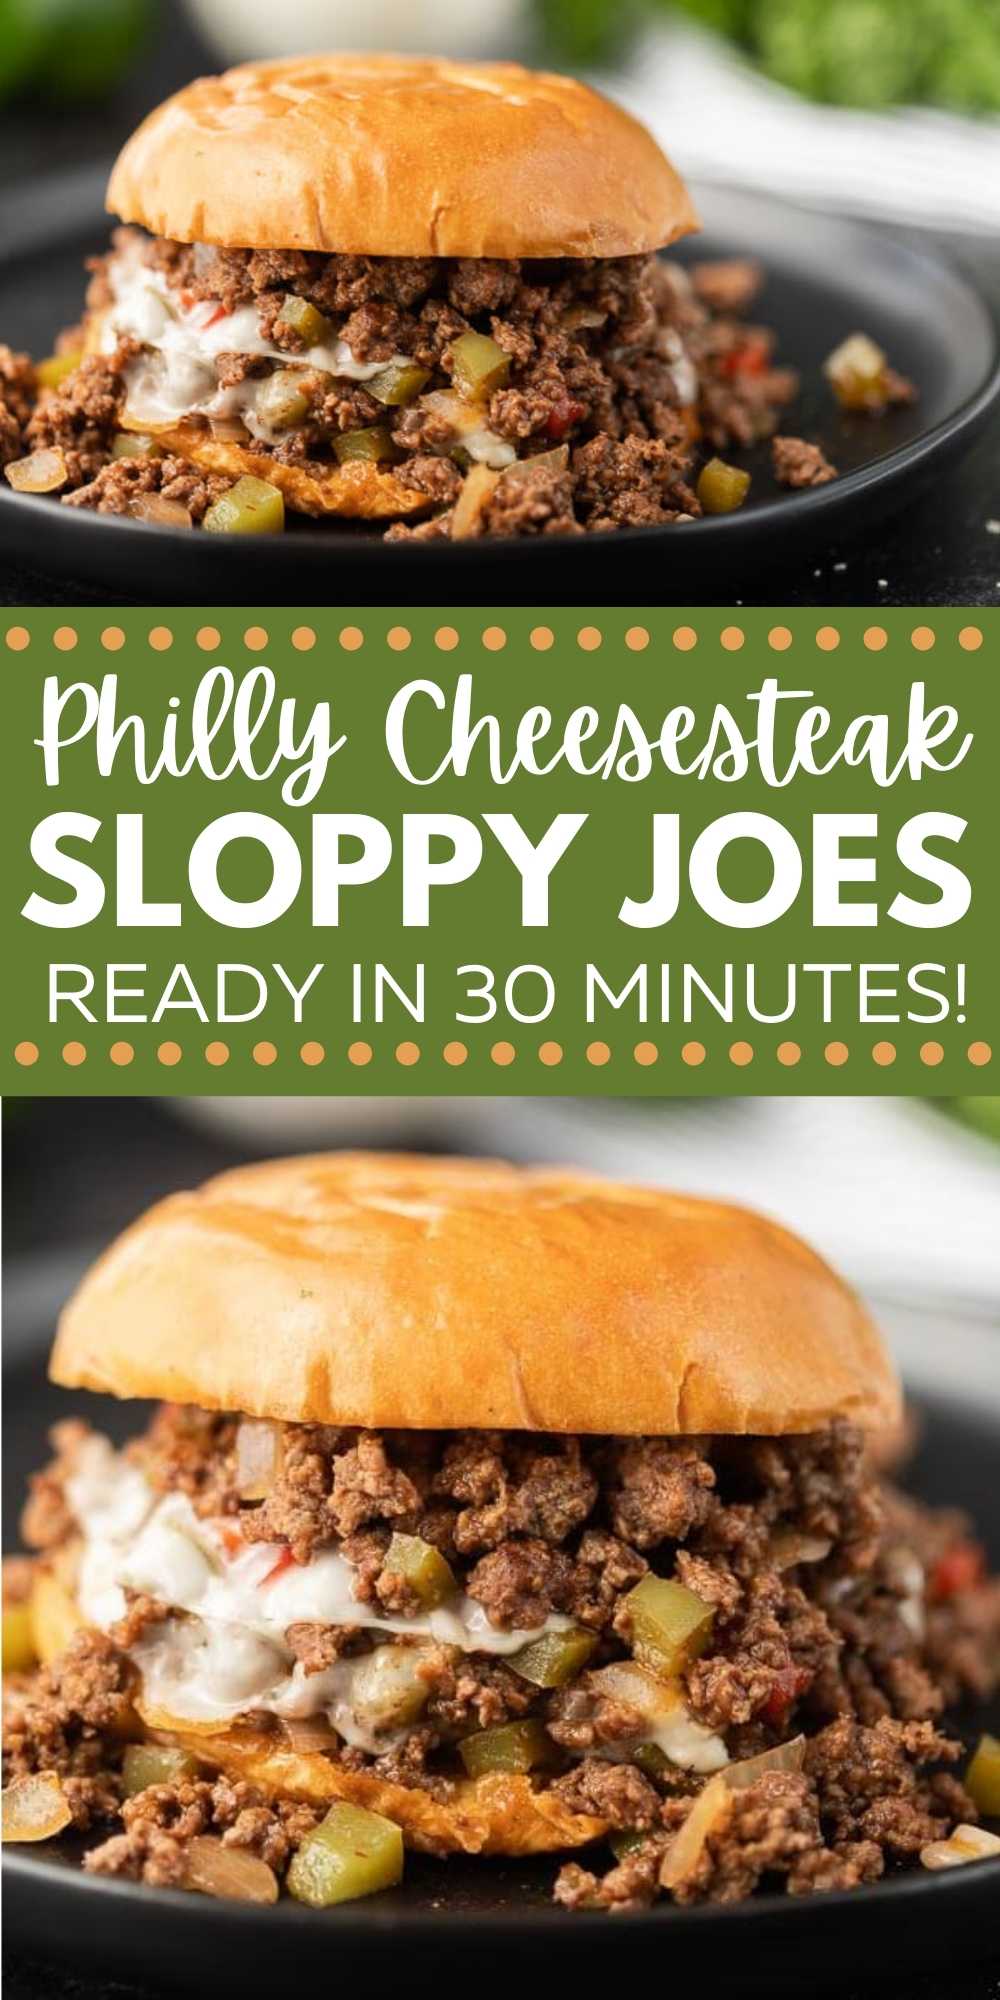 Try this Easy Philly Cheesesteak sloppy joes recipe for a quick dinner ready in 30 minutes! Everyone will love cheesesteak style sloppy joes. The onions, peppers and cheese are so good! Philly cheese steak sloppy joes are so simple and cheap to make. Make this Philly cheesesteak sloppy joe recipe today! Includes stovetop and crock pot recipe! #eatingonadime #sloppyjoes #stovetoprecipes #crockpotrecipes 
